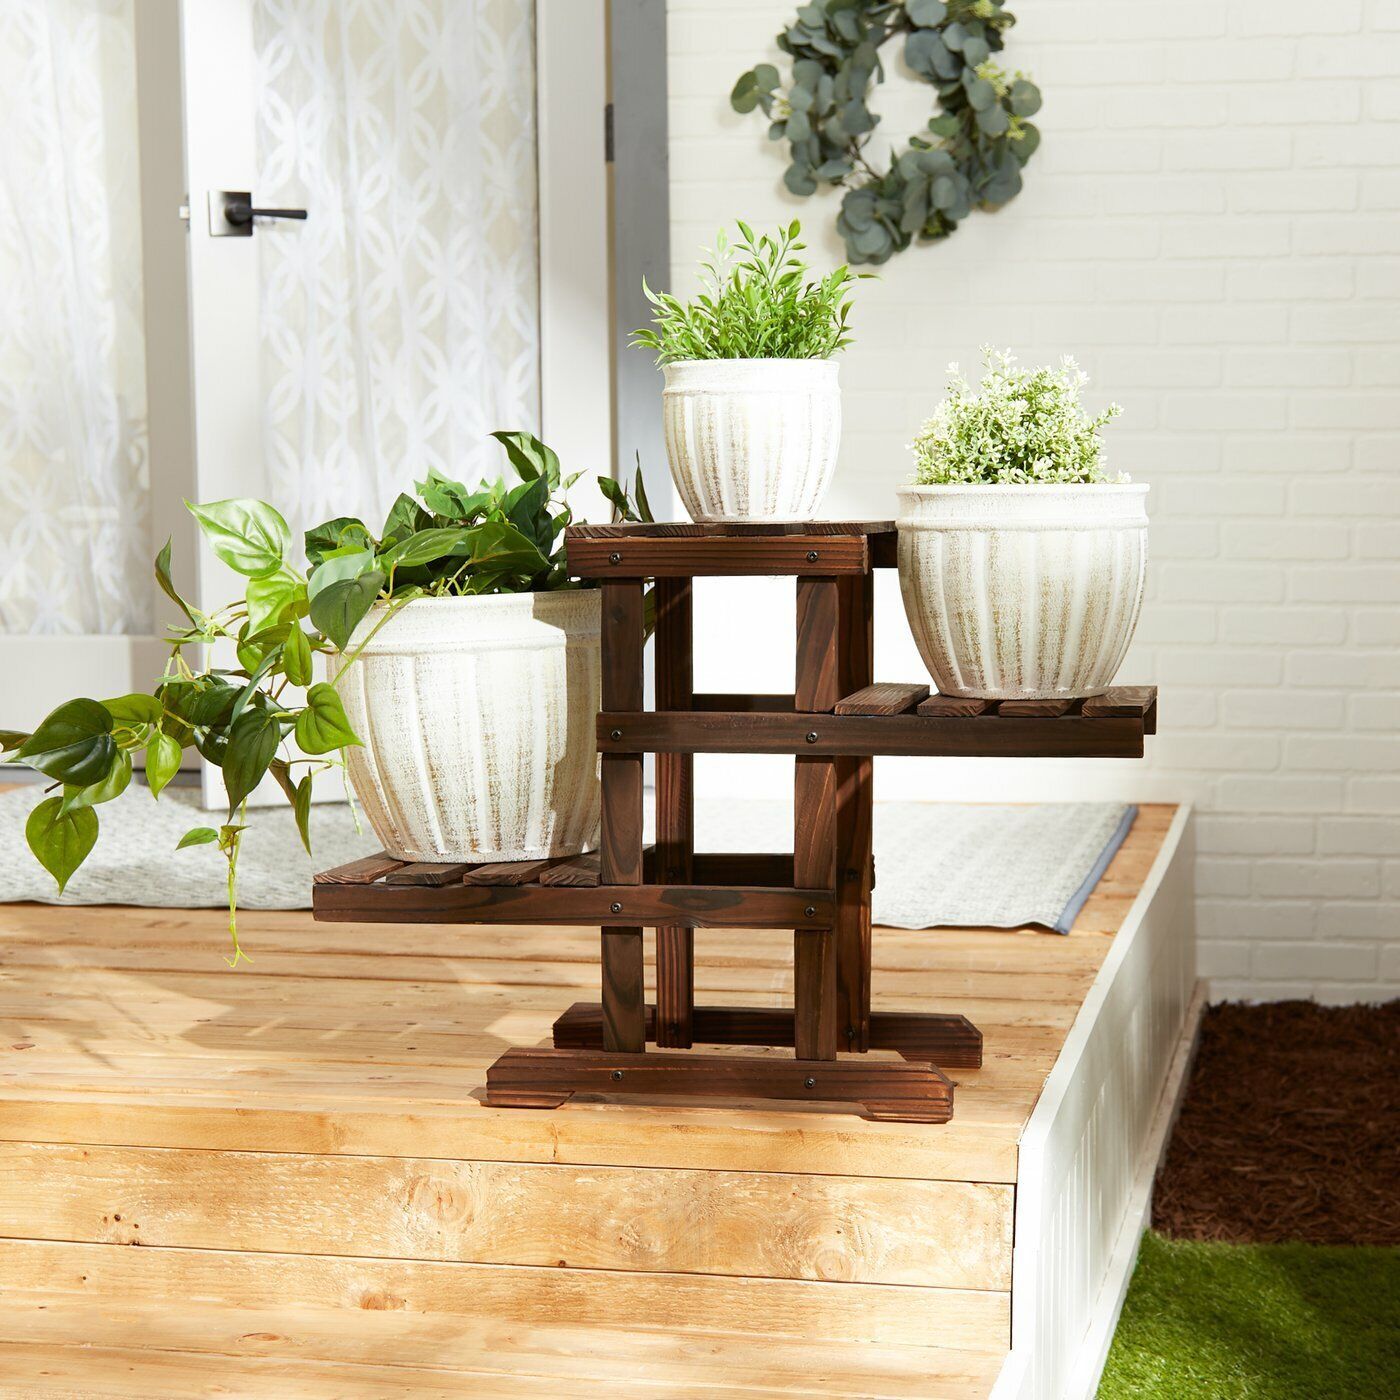 Rustic Farm House Style Indoor Outdoor Garden Planter Plant Stand With 3  Shelf | Ebay Within Rustic Plant Stands (View 12 of 15)